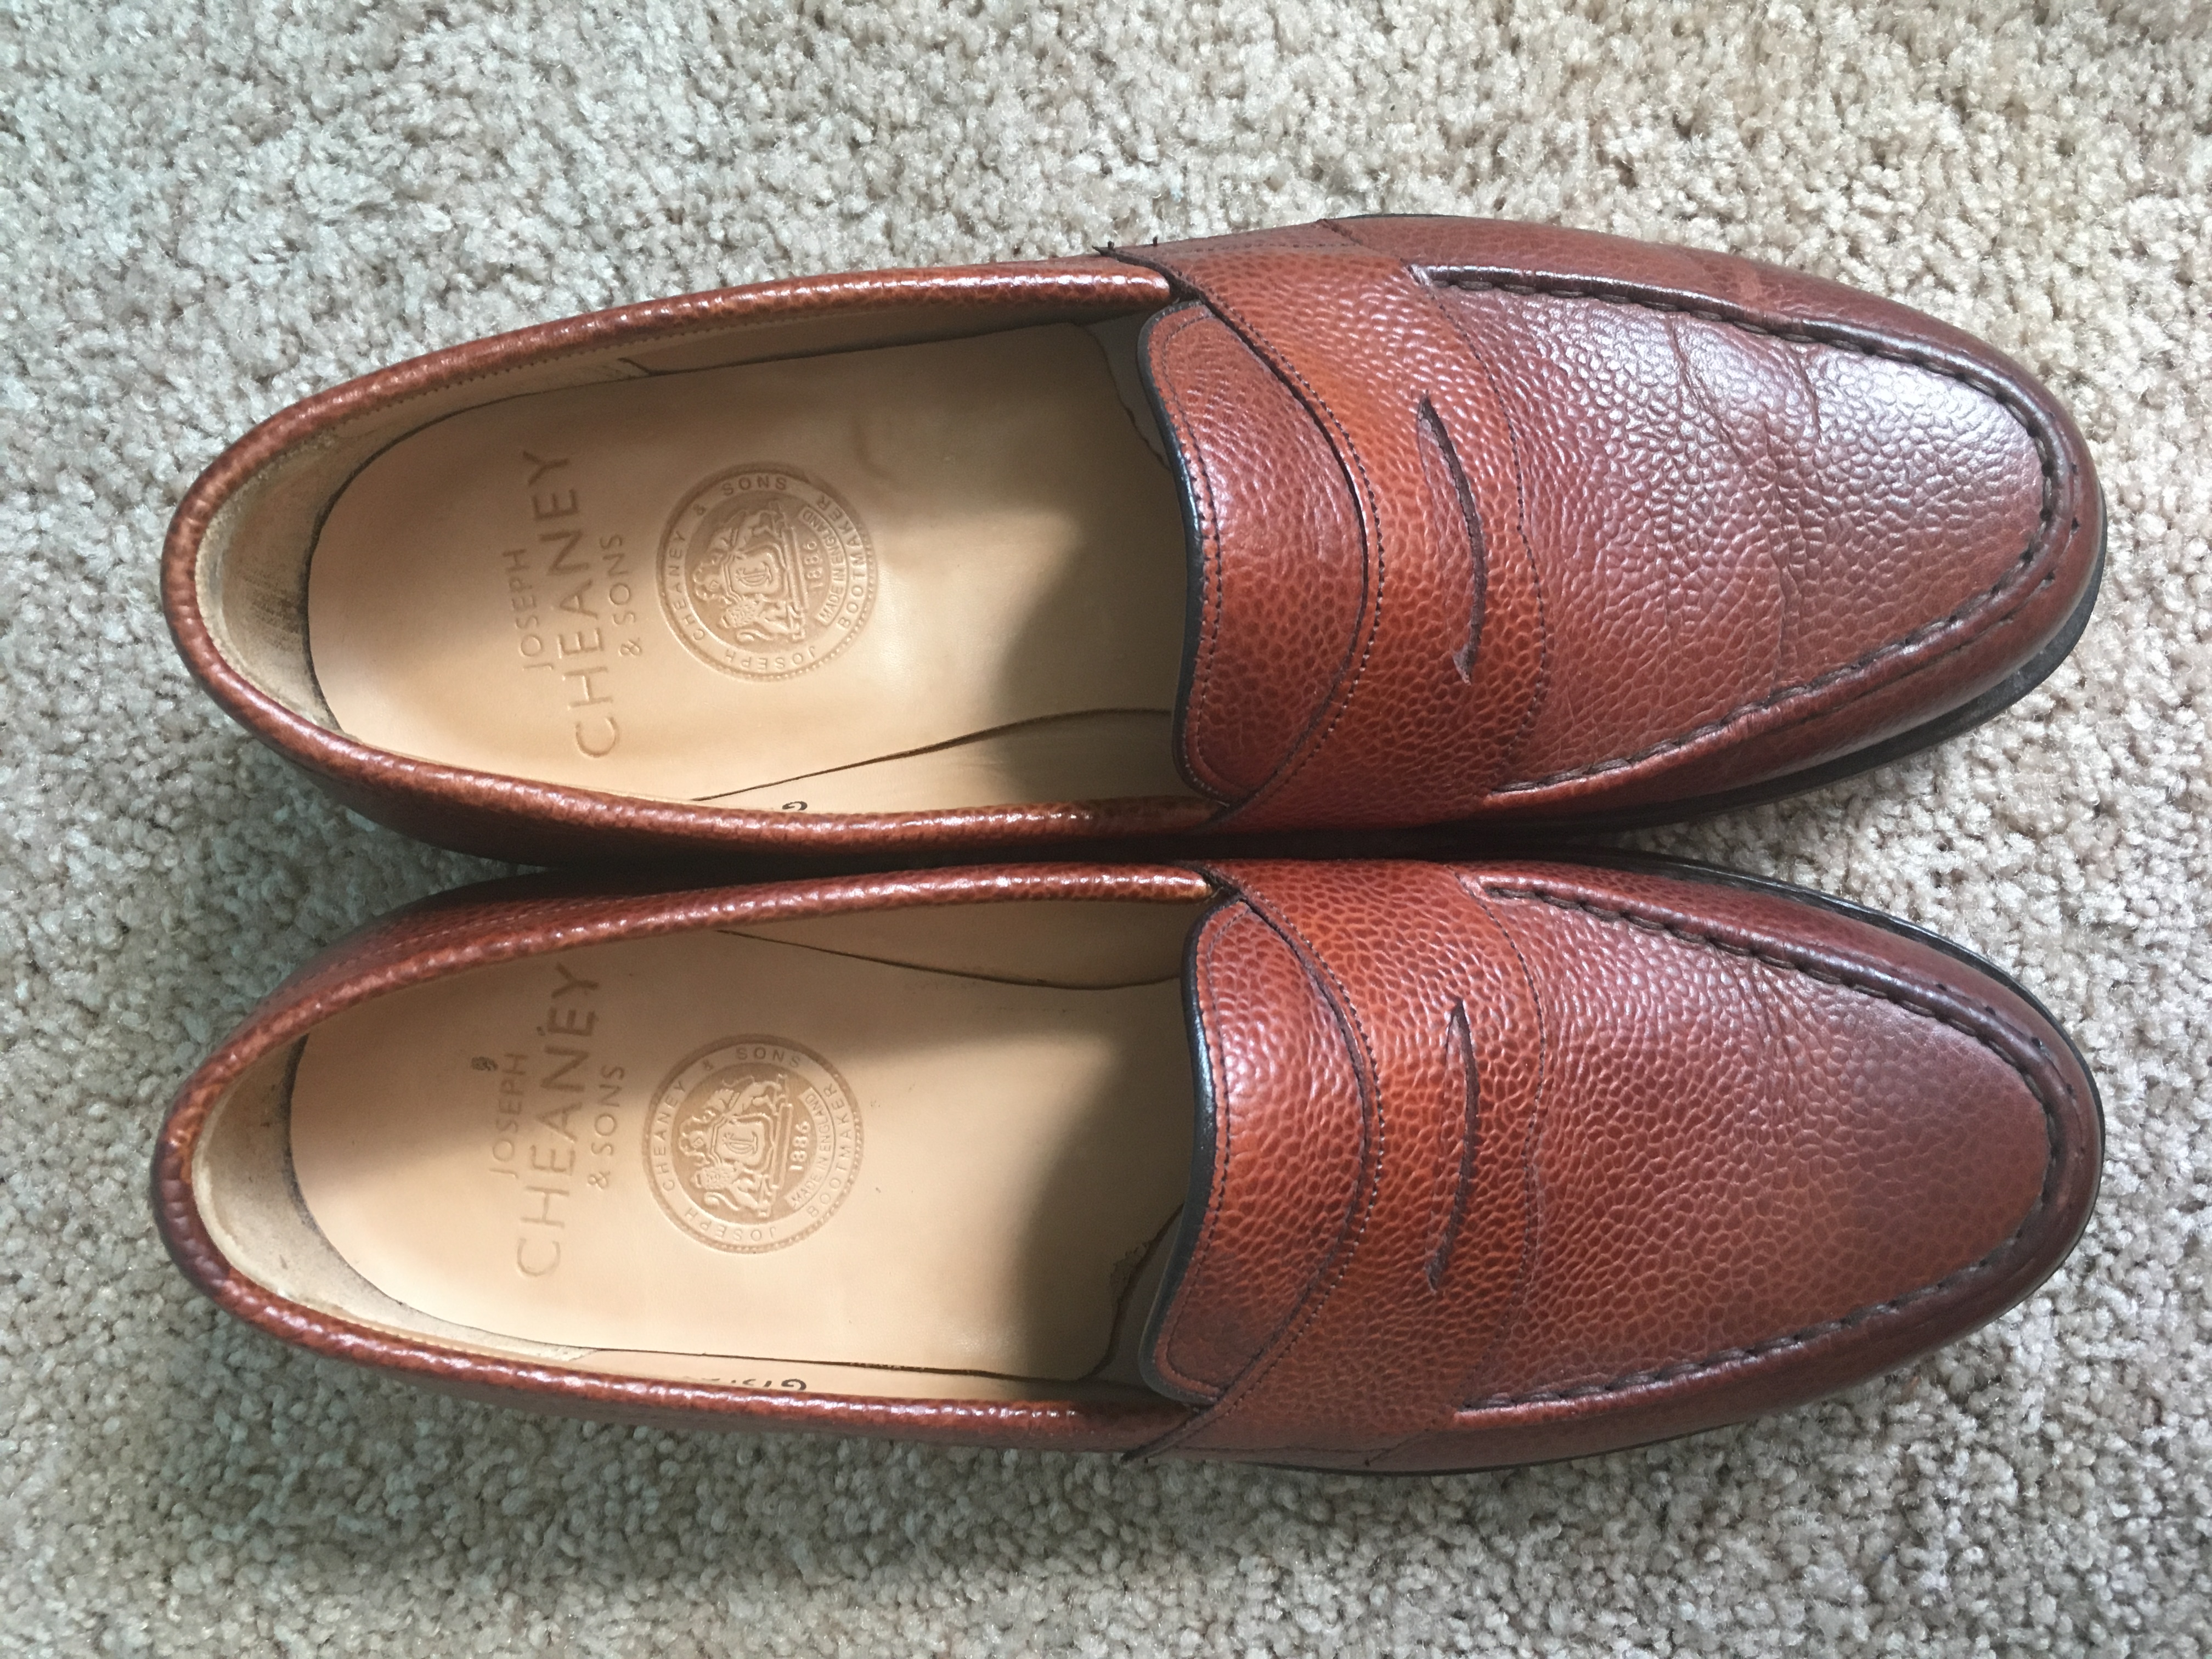 joseph cheaney loafers